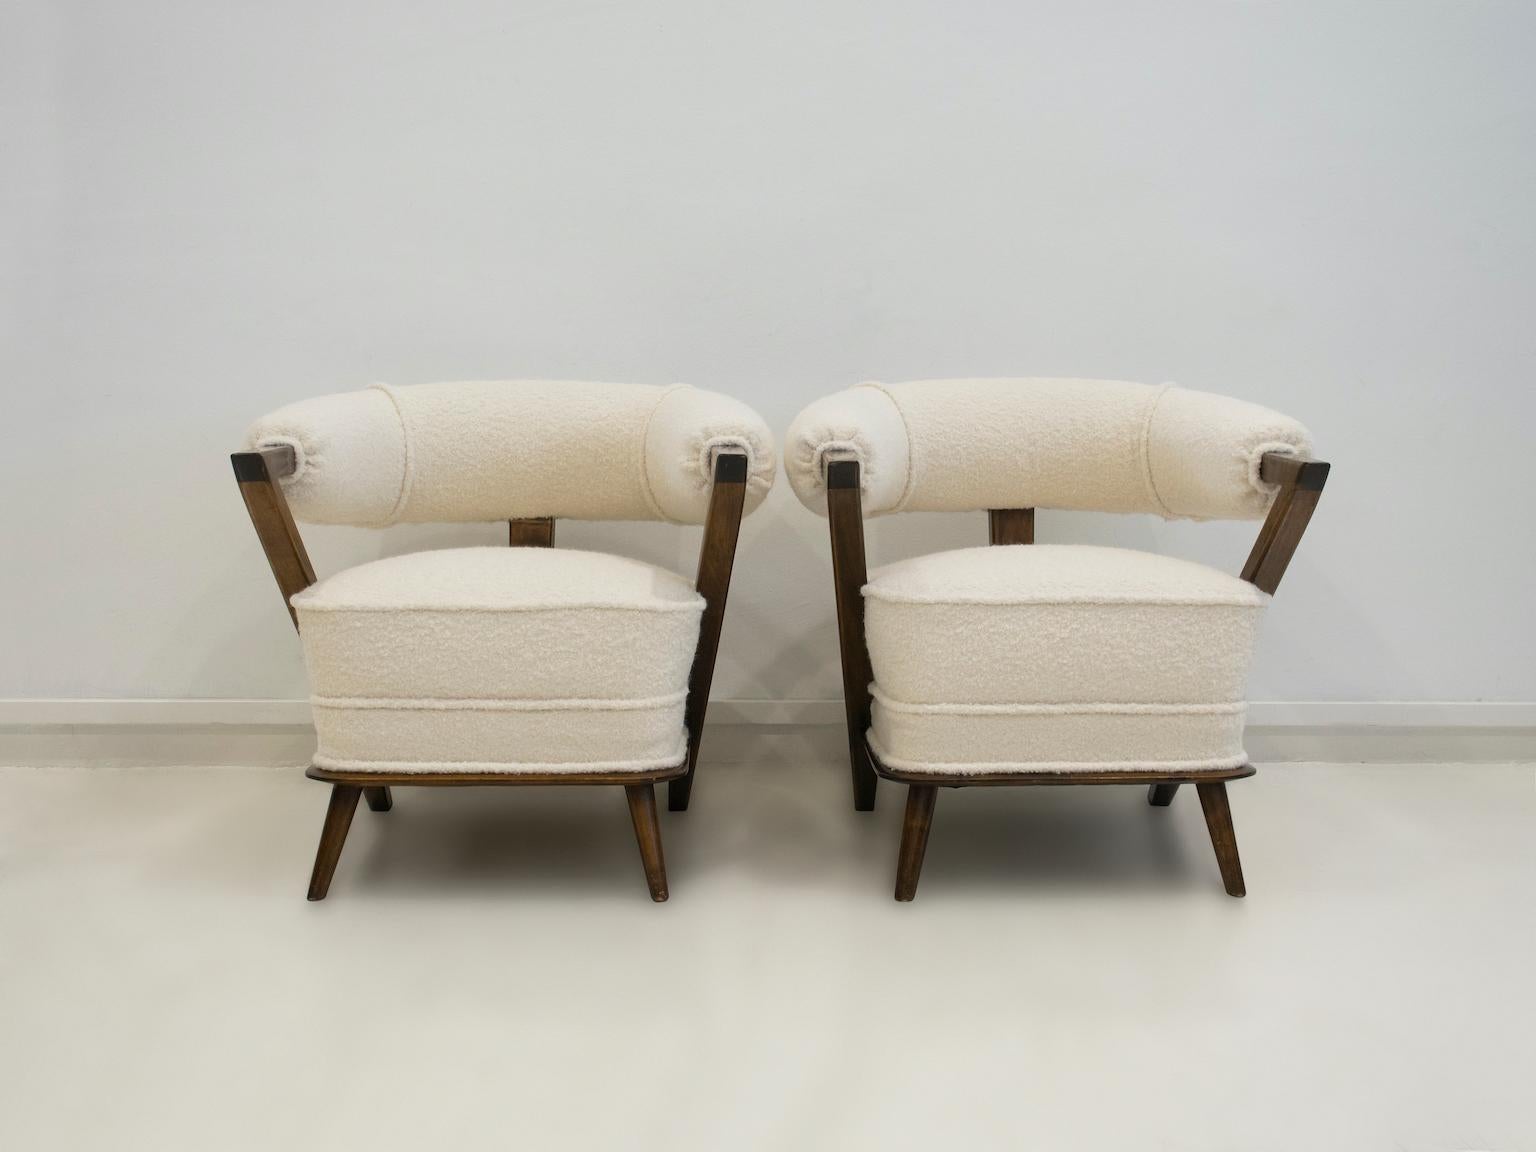 Pair elegant of white Art Deco style tub armchairs, manufactured in Italy during the 1960s. Dark stained wood frame and new white bouclé fabric upholstery. Minor wear on the wooden part of the armrests.